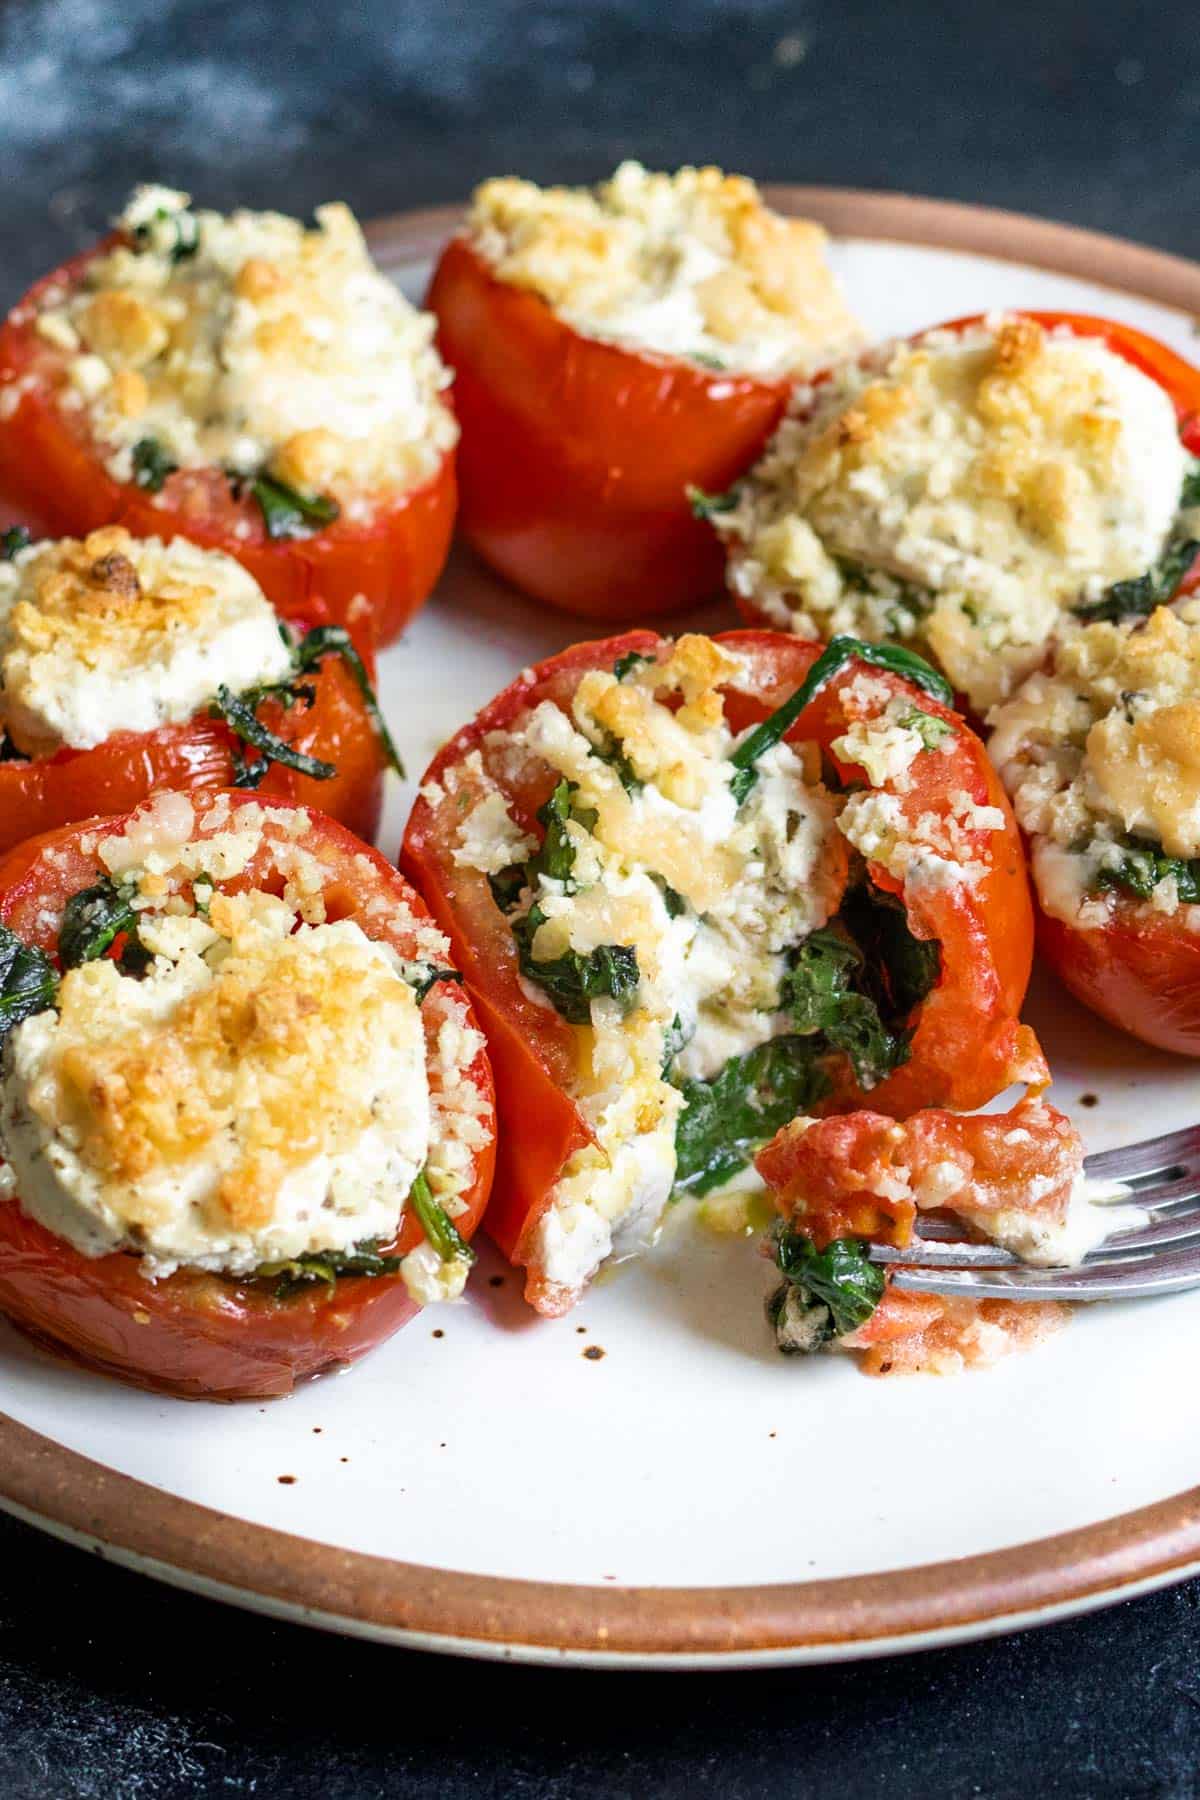 Tomatoes hollowed out and stuffed with wilted spinach, herbed goat cheese, parmesan, and Moon Cheese.